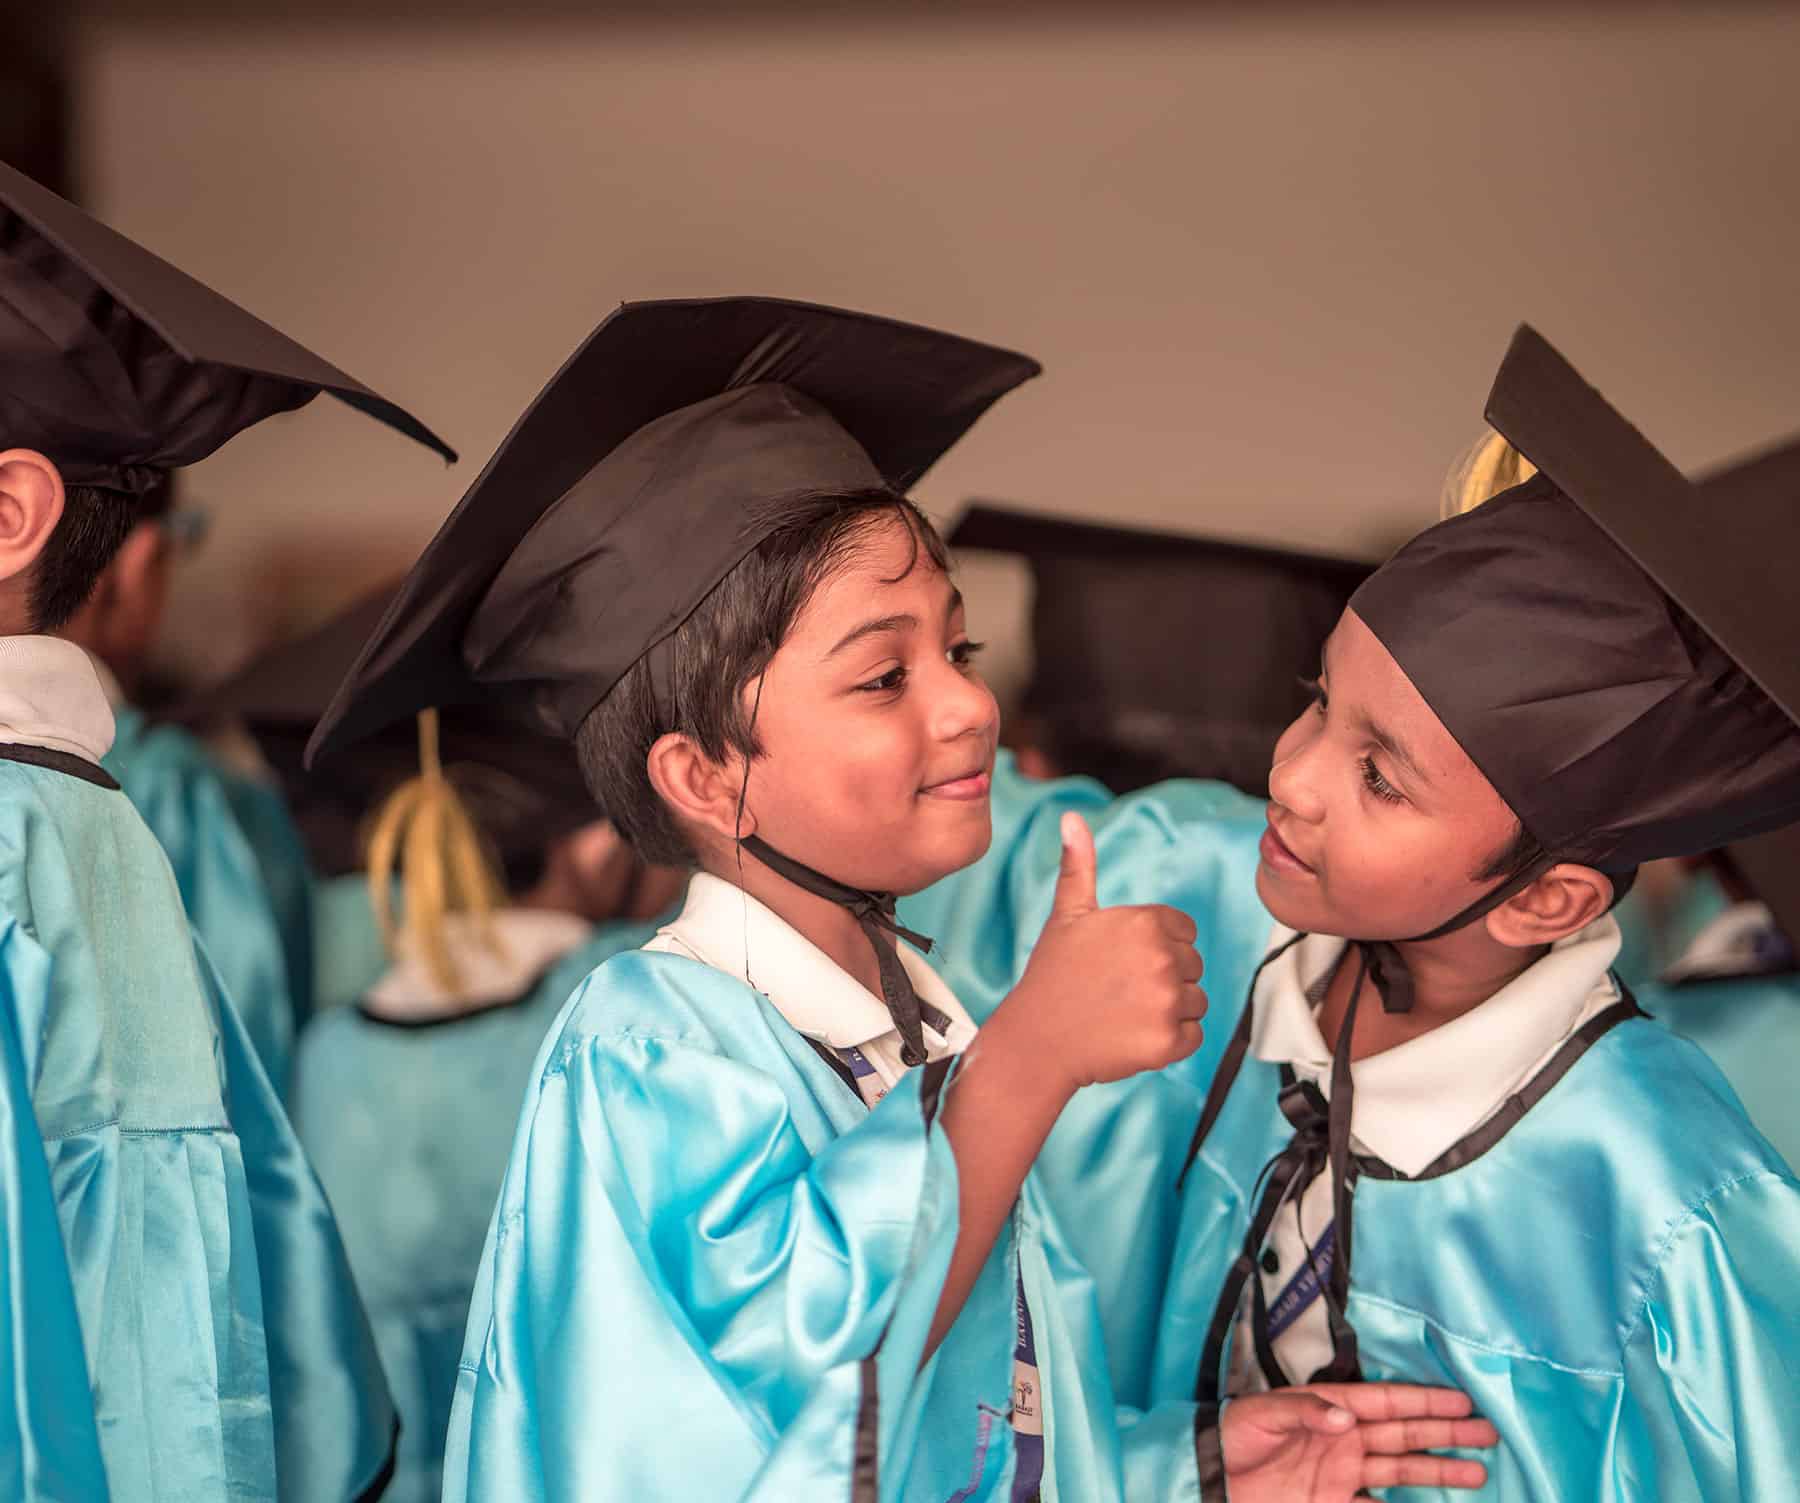 A small young boys wearing graduation cap and a costume is showing thumbs up to his classmate.